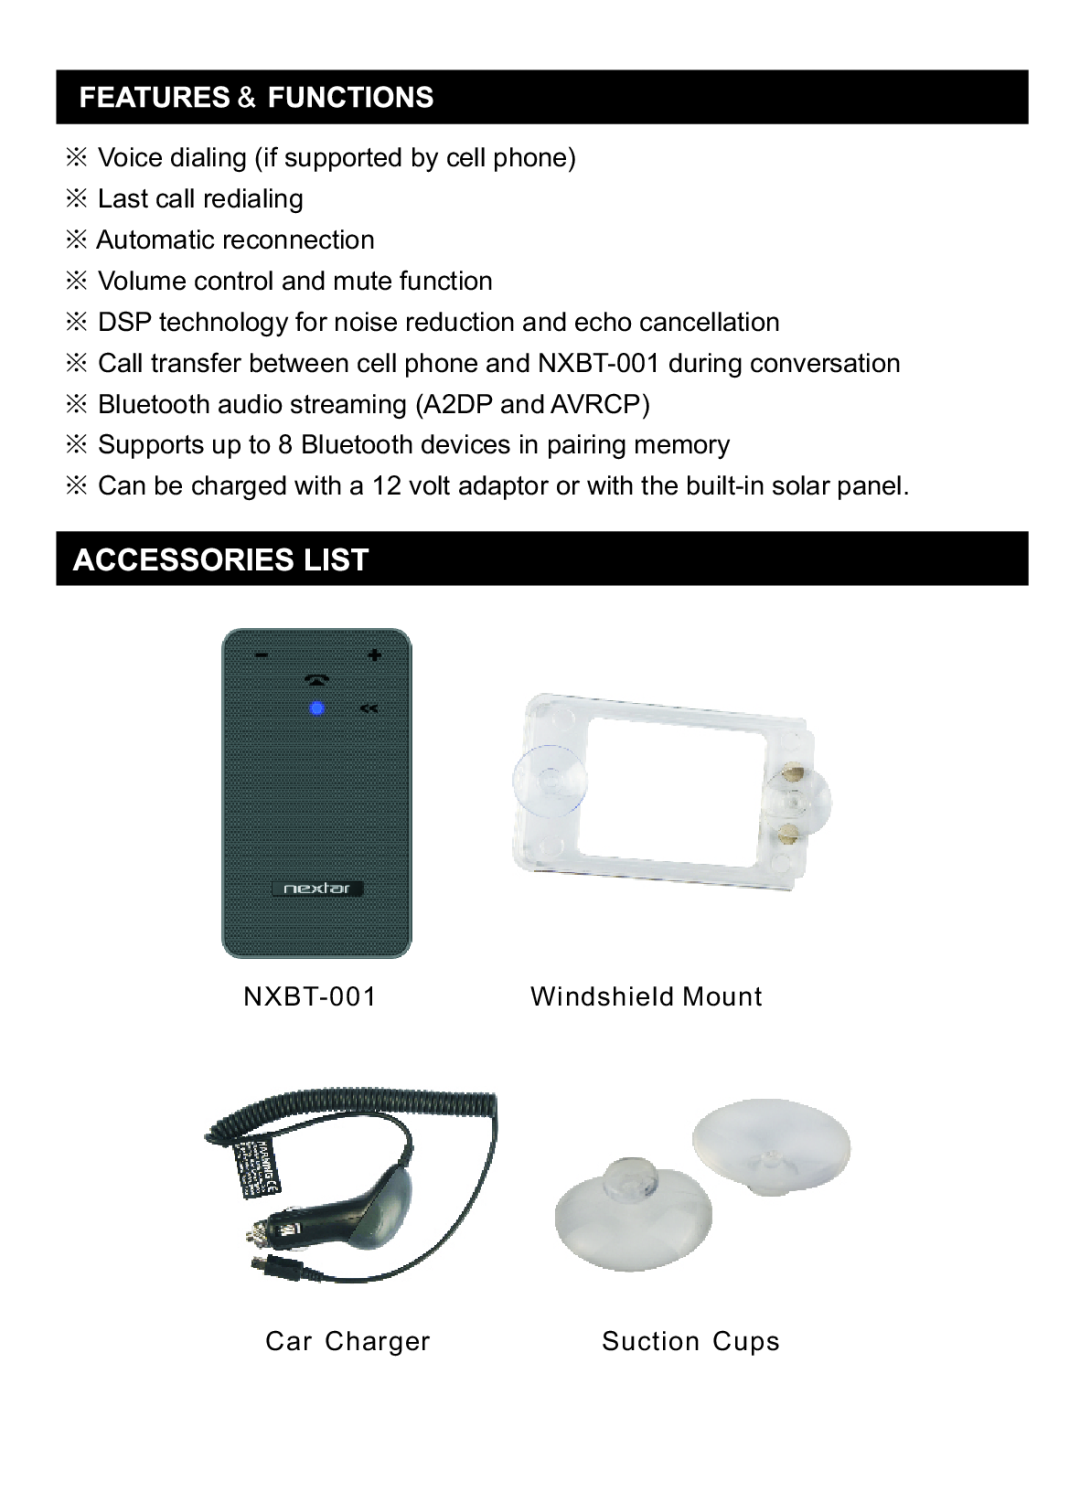 Nextar NXBT-001 ※Voice dialing if supported by cell phone, ※Last call redialing ※Automatic reconnection, Windshield Mount 